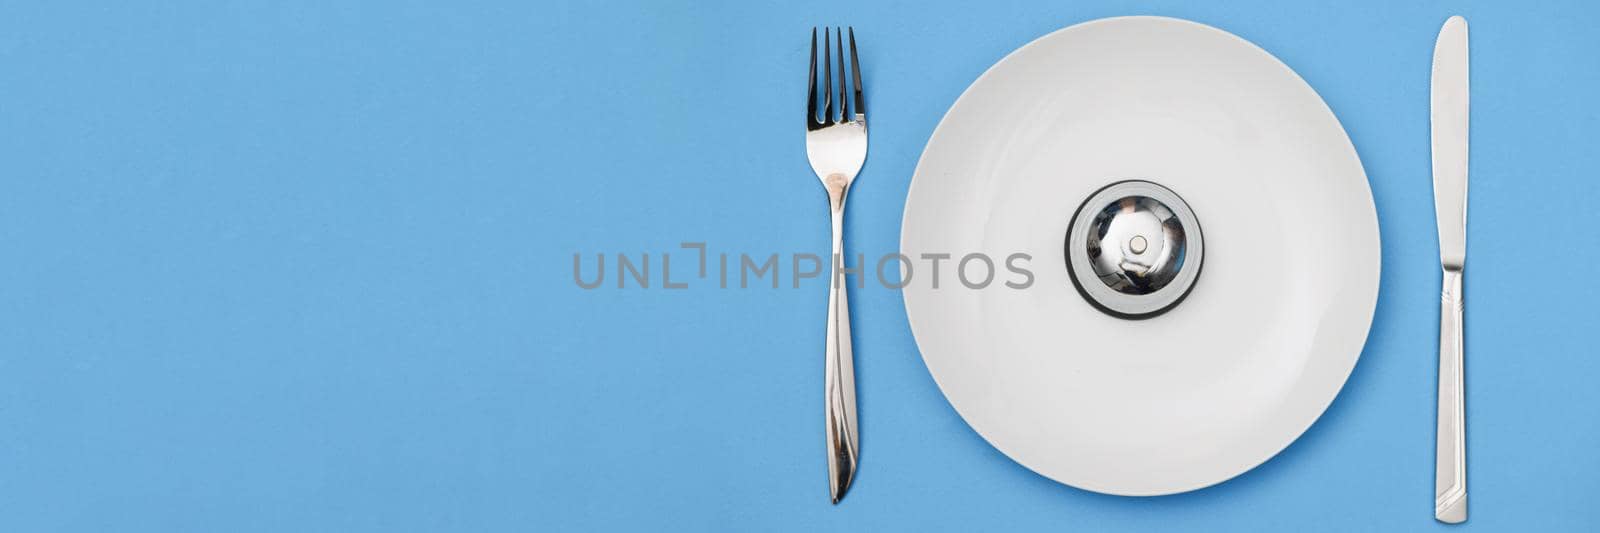 Top view of white plate with iron bell and appliances for food. Time to eat, dieting and meal-planning concept. Meals on schedule idea. Isolated on blue background